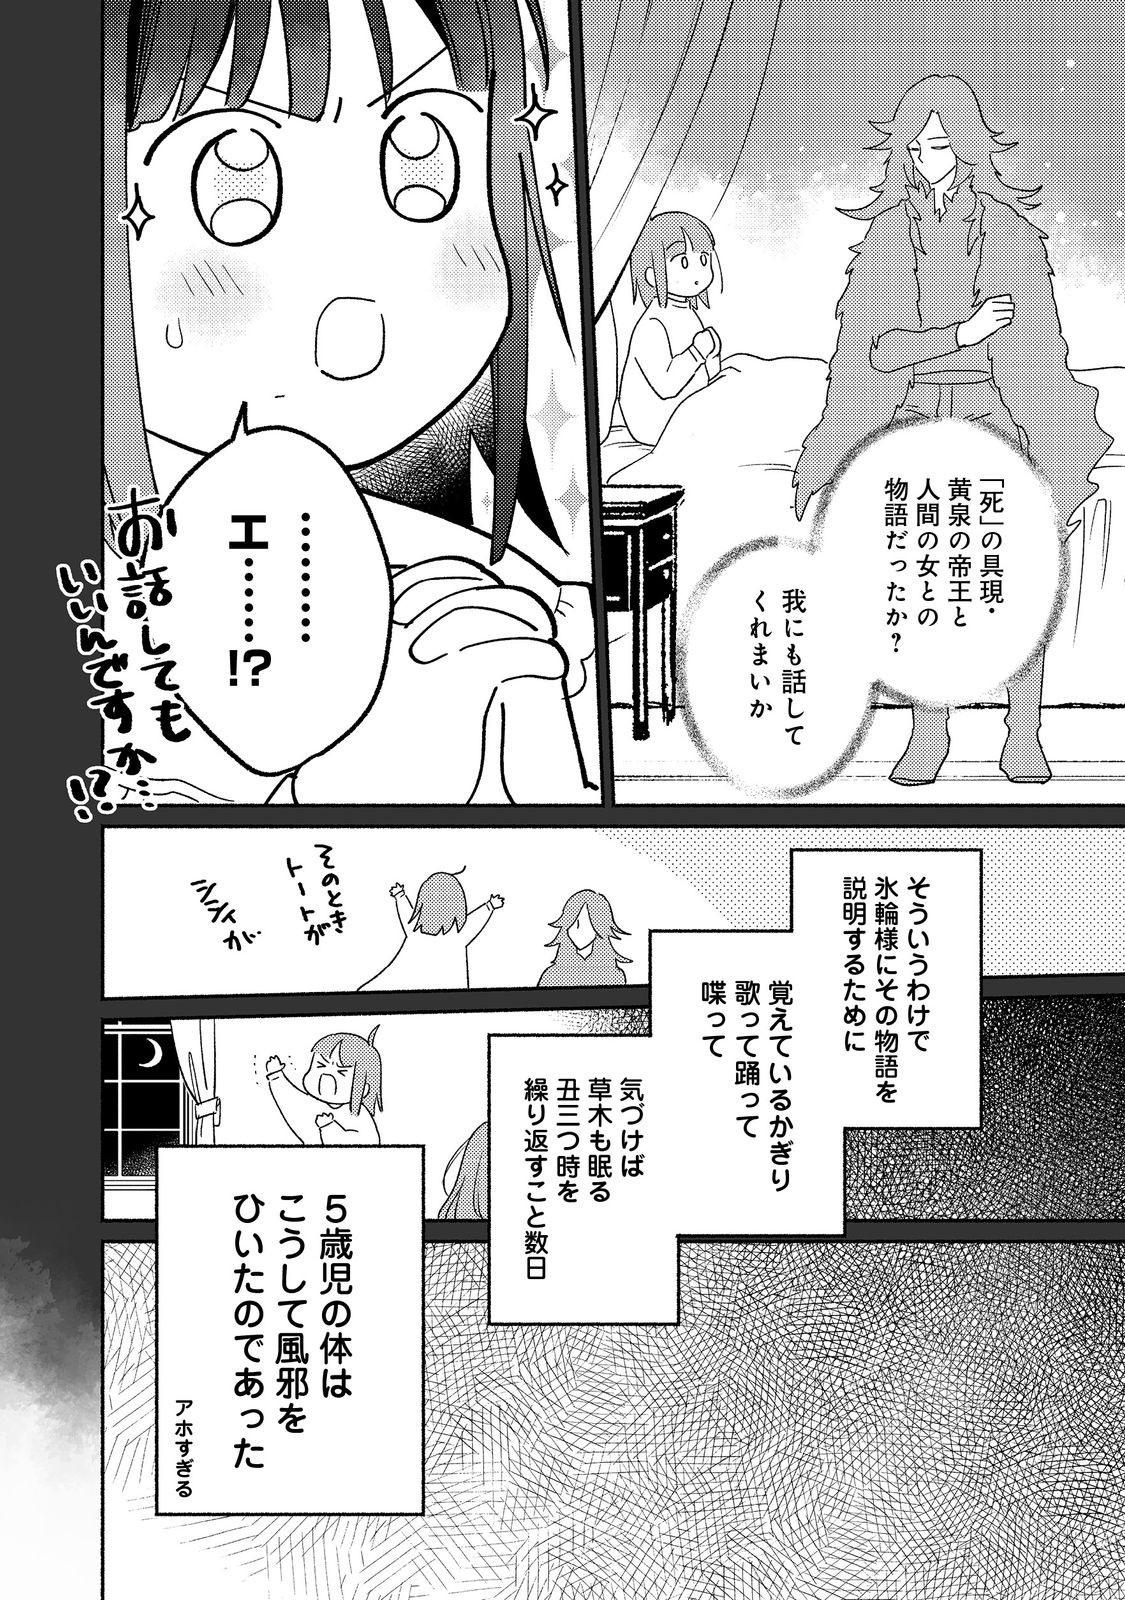 I’m the White Pig Nobleman 第22.1話 - Page 10